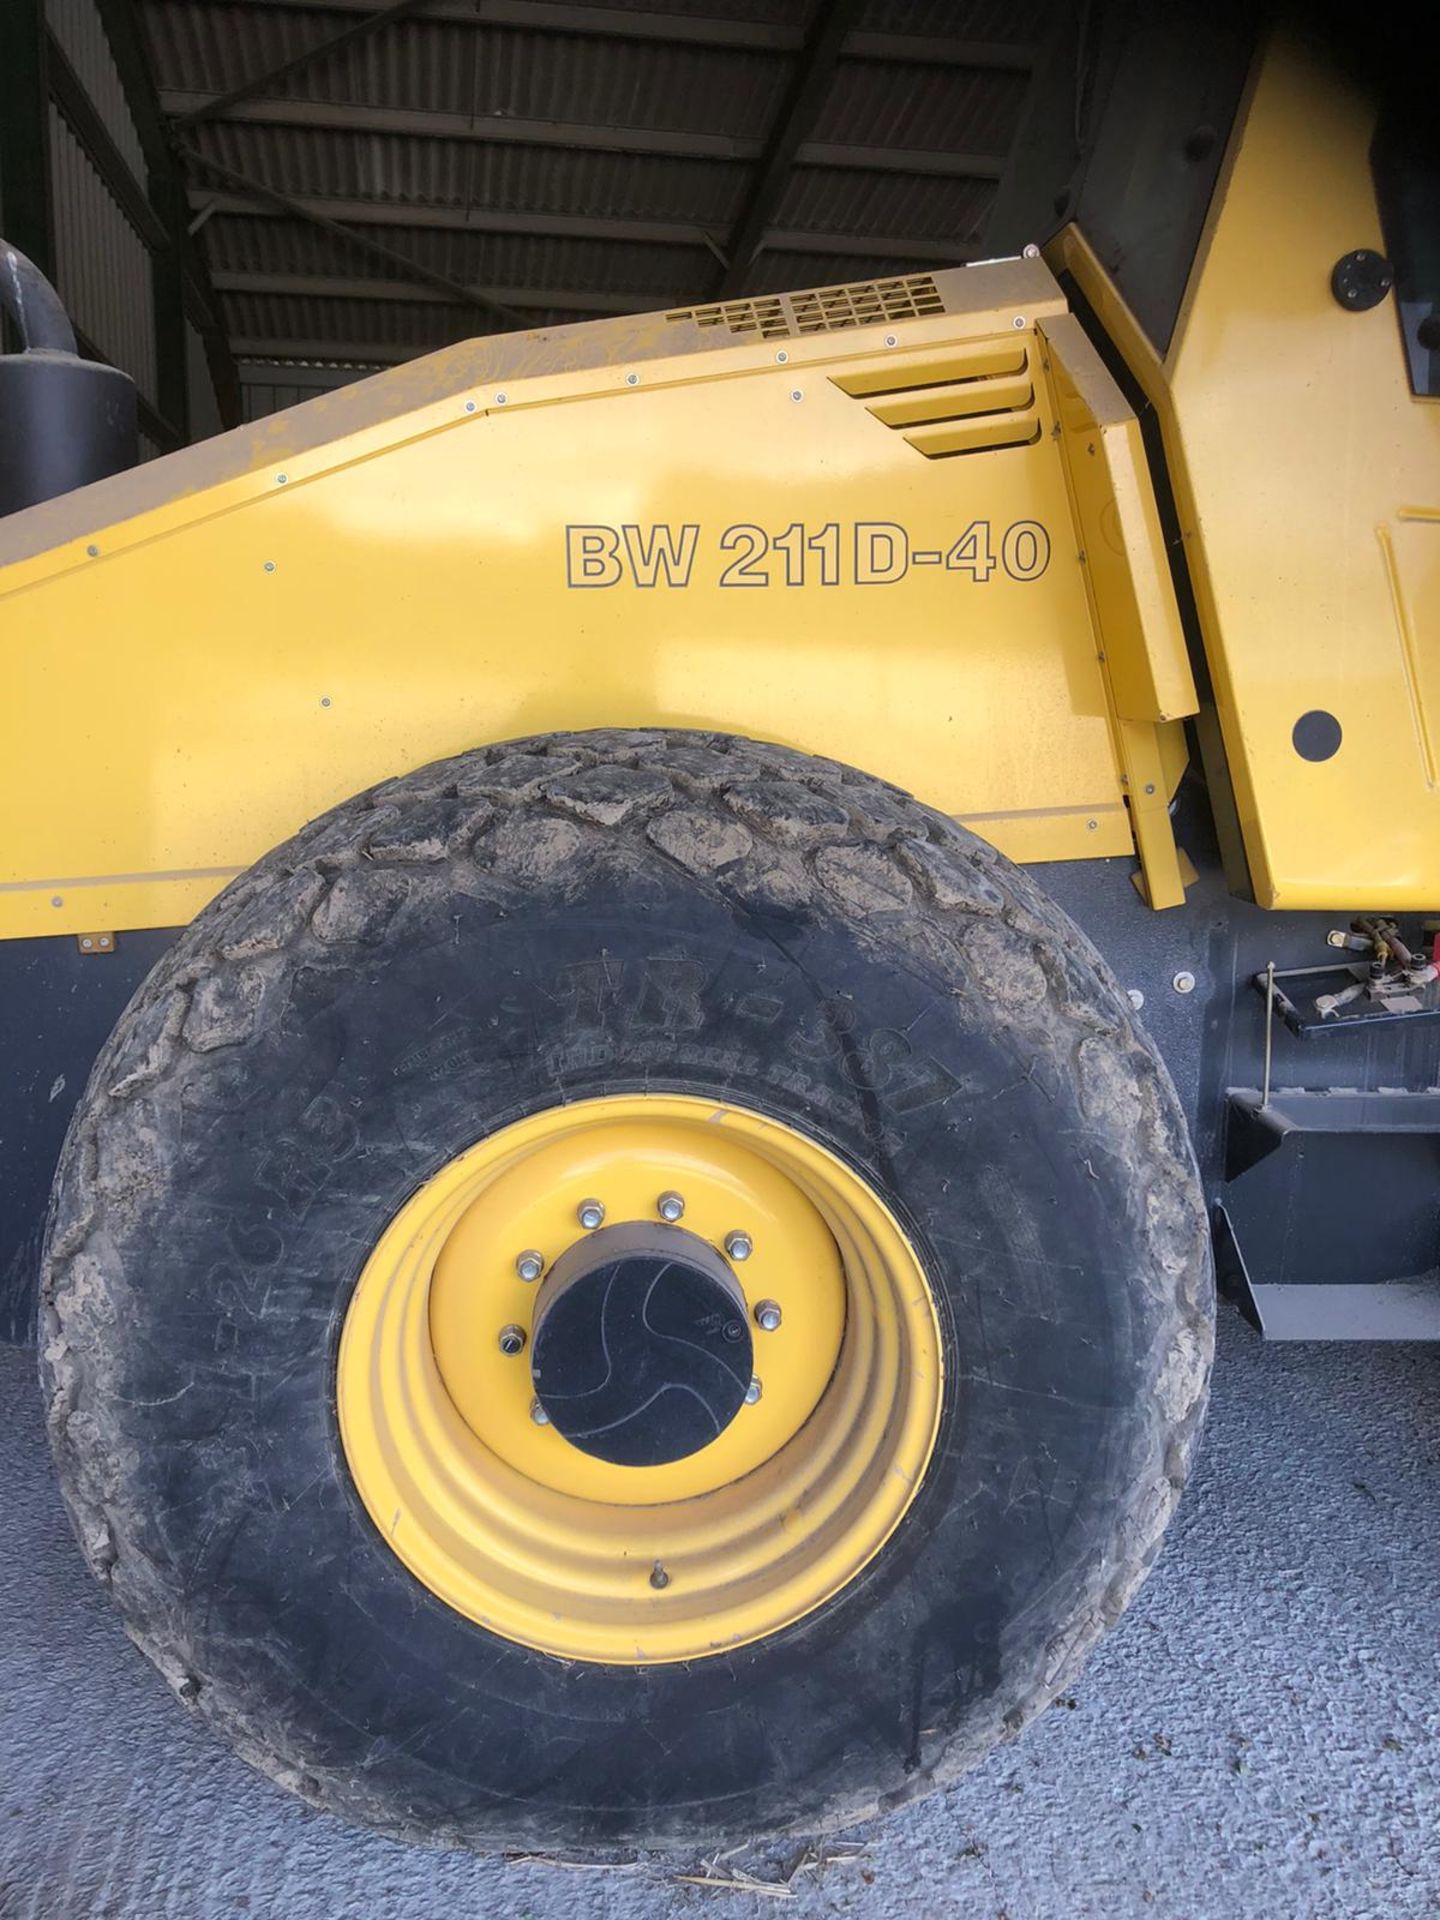 Bomag Single Drum Roller BW 211 D-40 2012 - Image 3 of 9